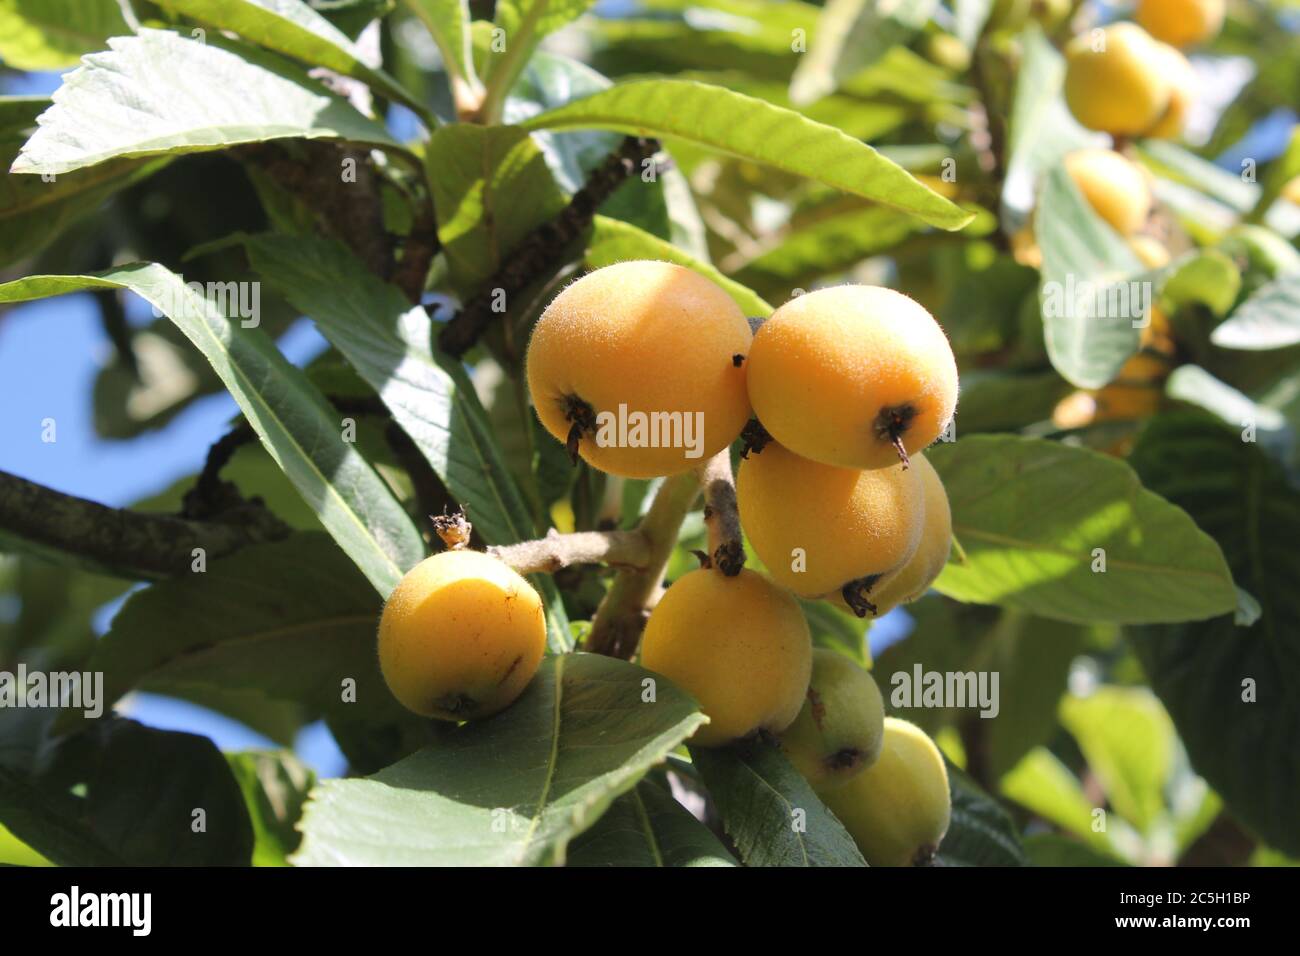 loquat(Eriobotrya japonica) fruit on loquat plant with a wonderful view of fruit plant Stock Photo